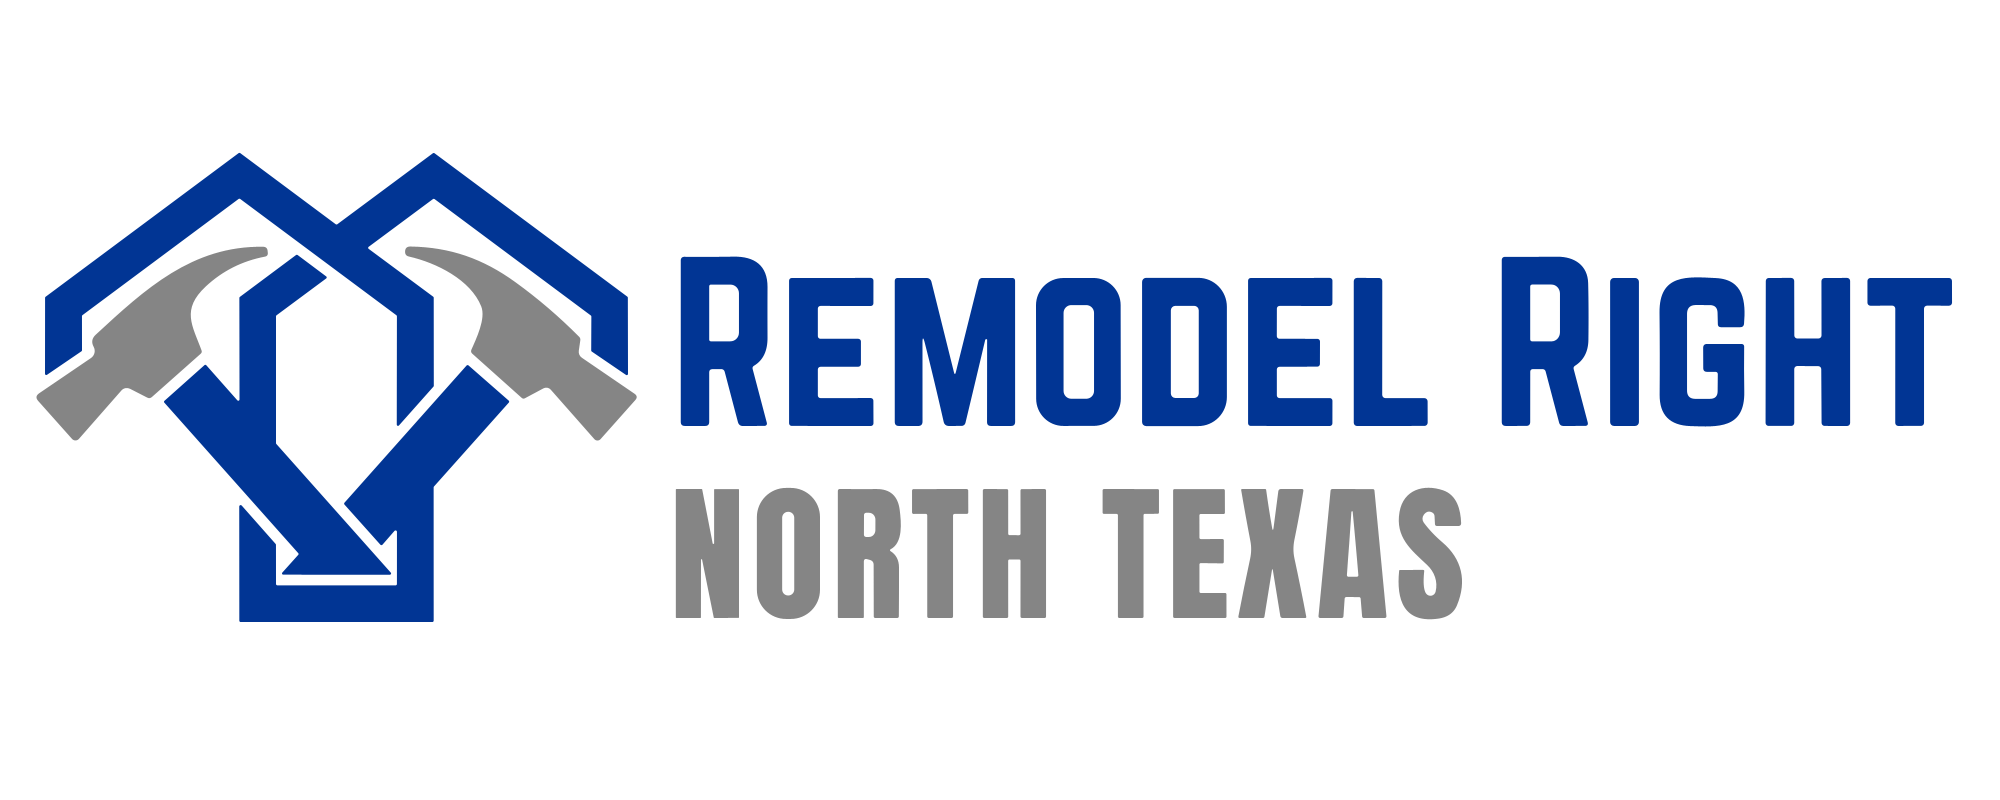 Remodel Right North Texas in Frisco, TX & Surroundings